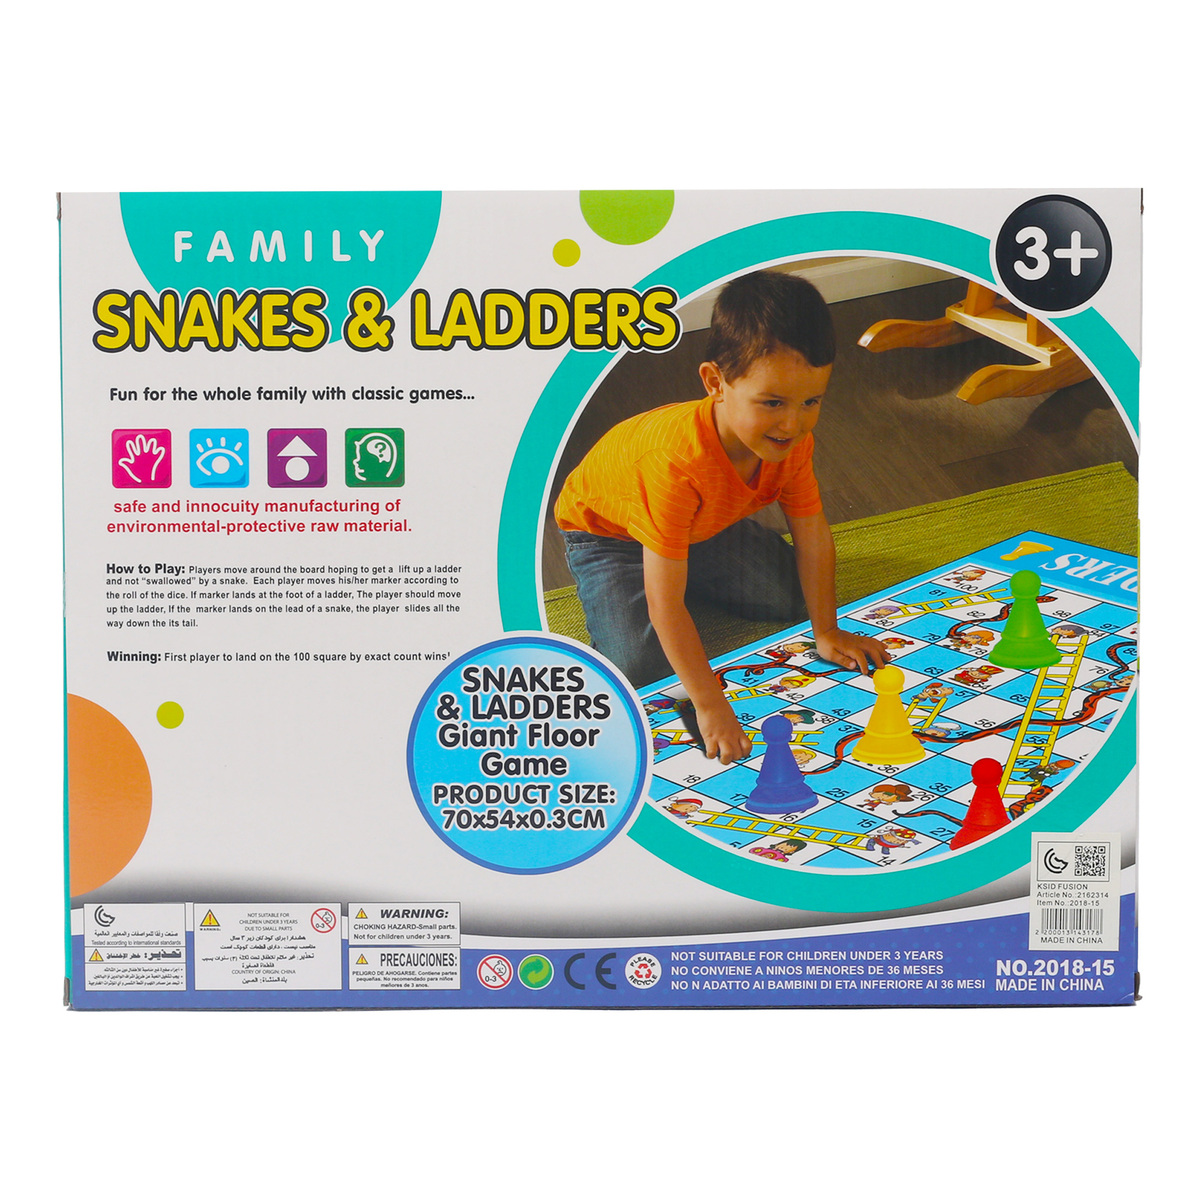 Skid Fusion Snakes & Ladders Mat Game 2018-15